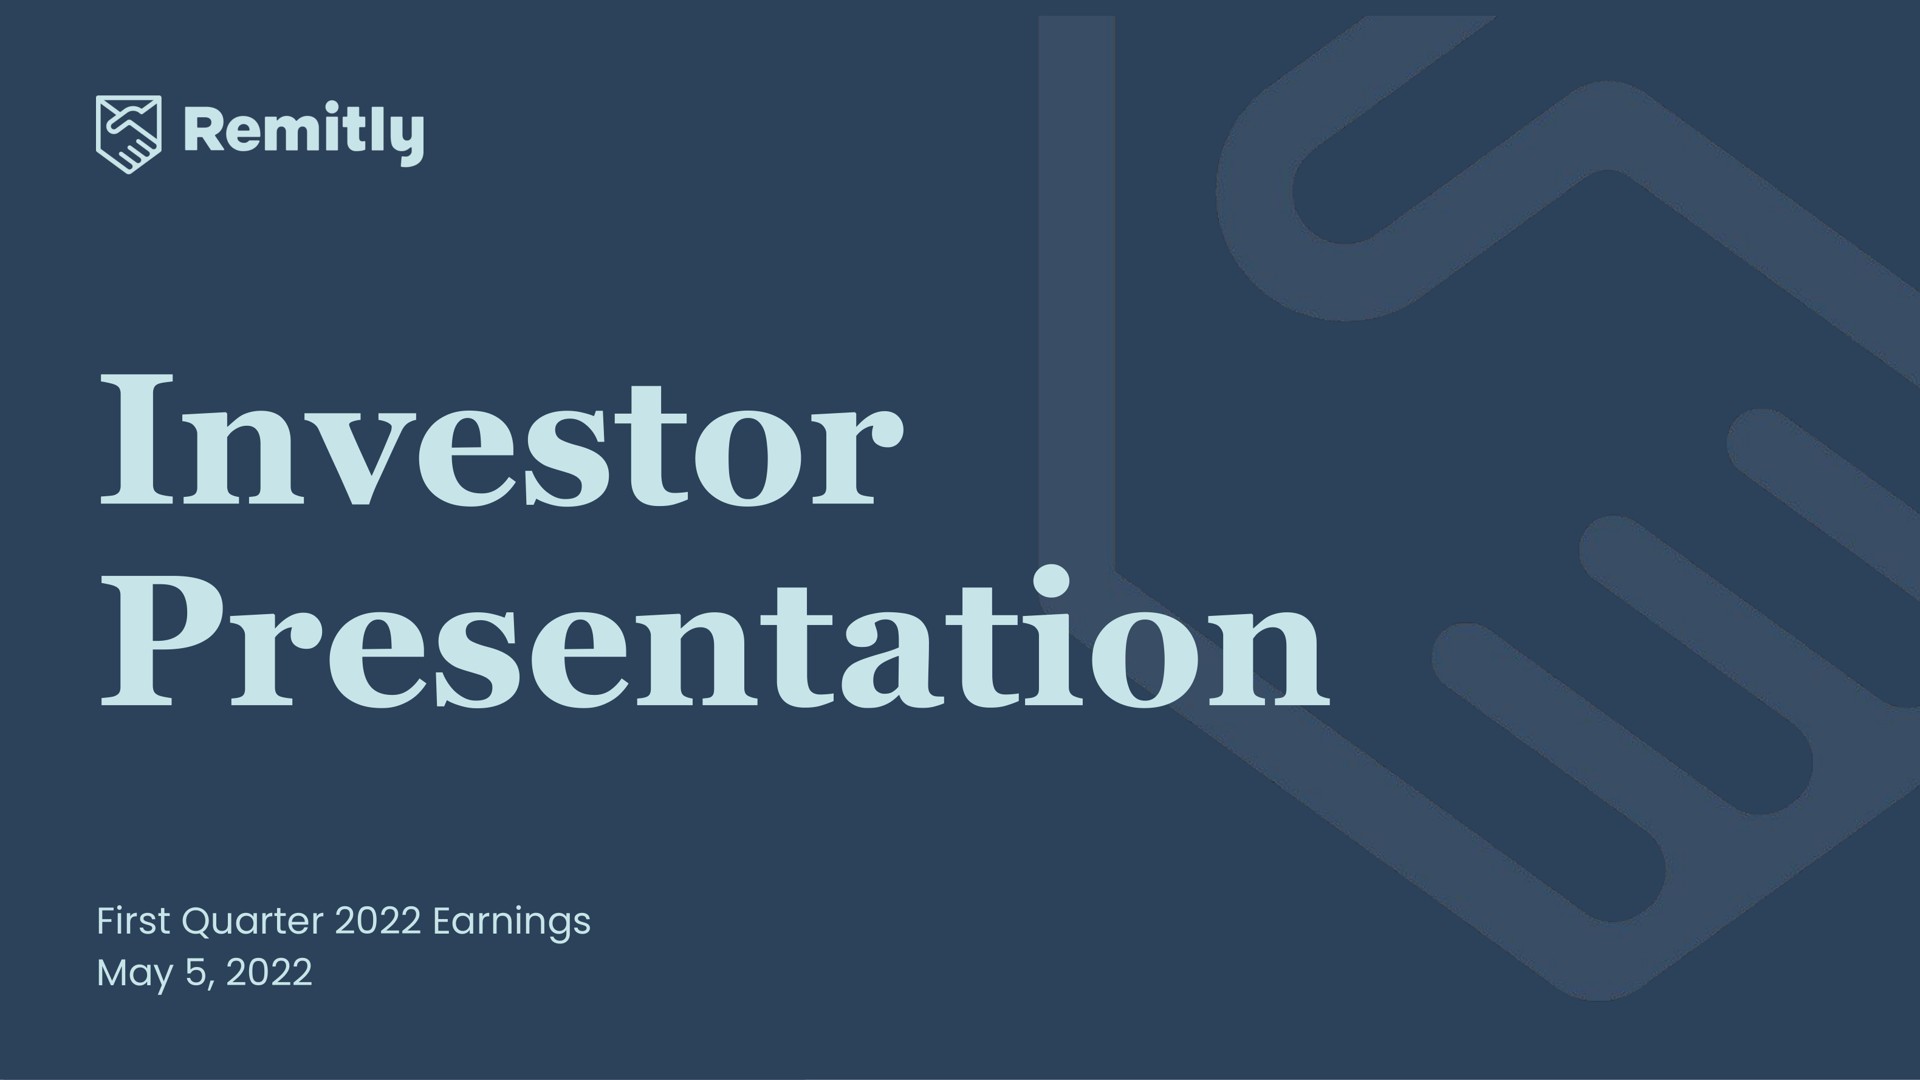 investor presentation first quarter earnings may rest | Remitly